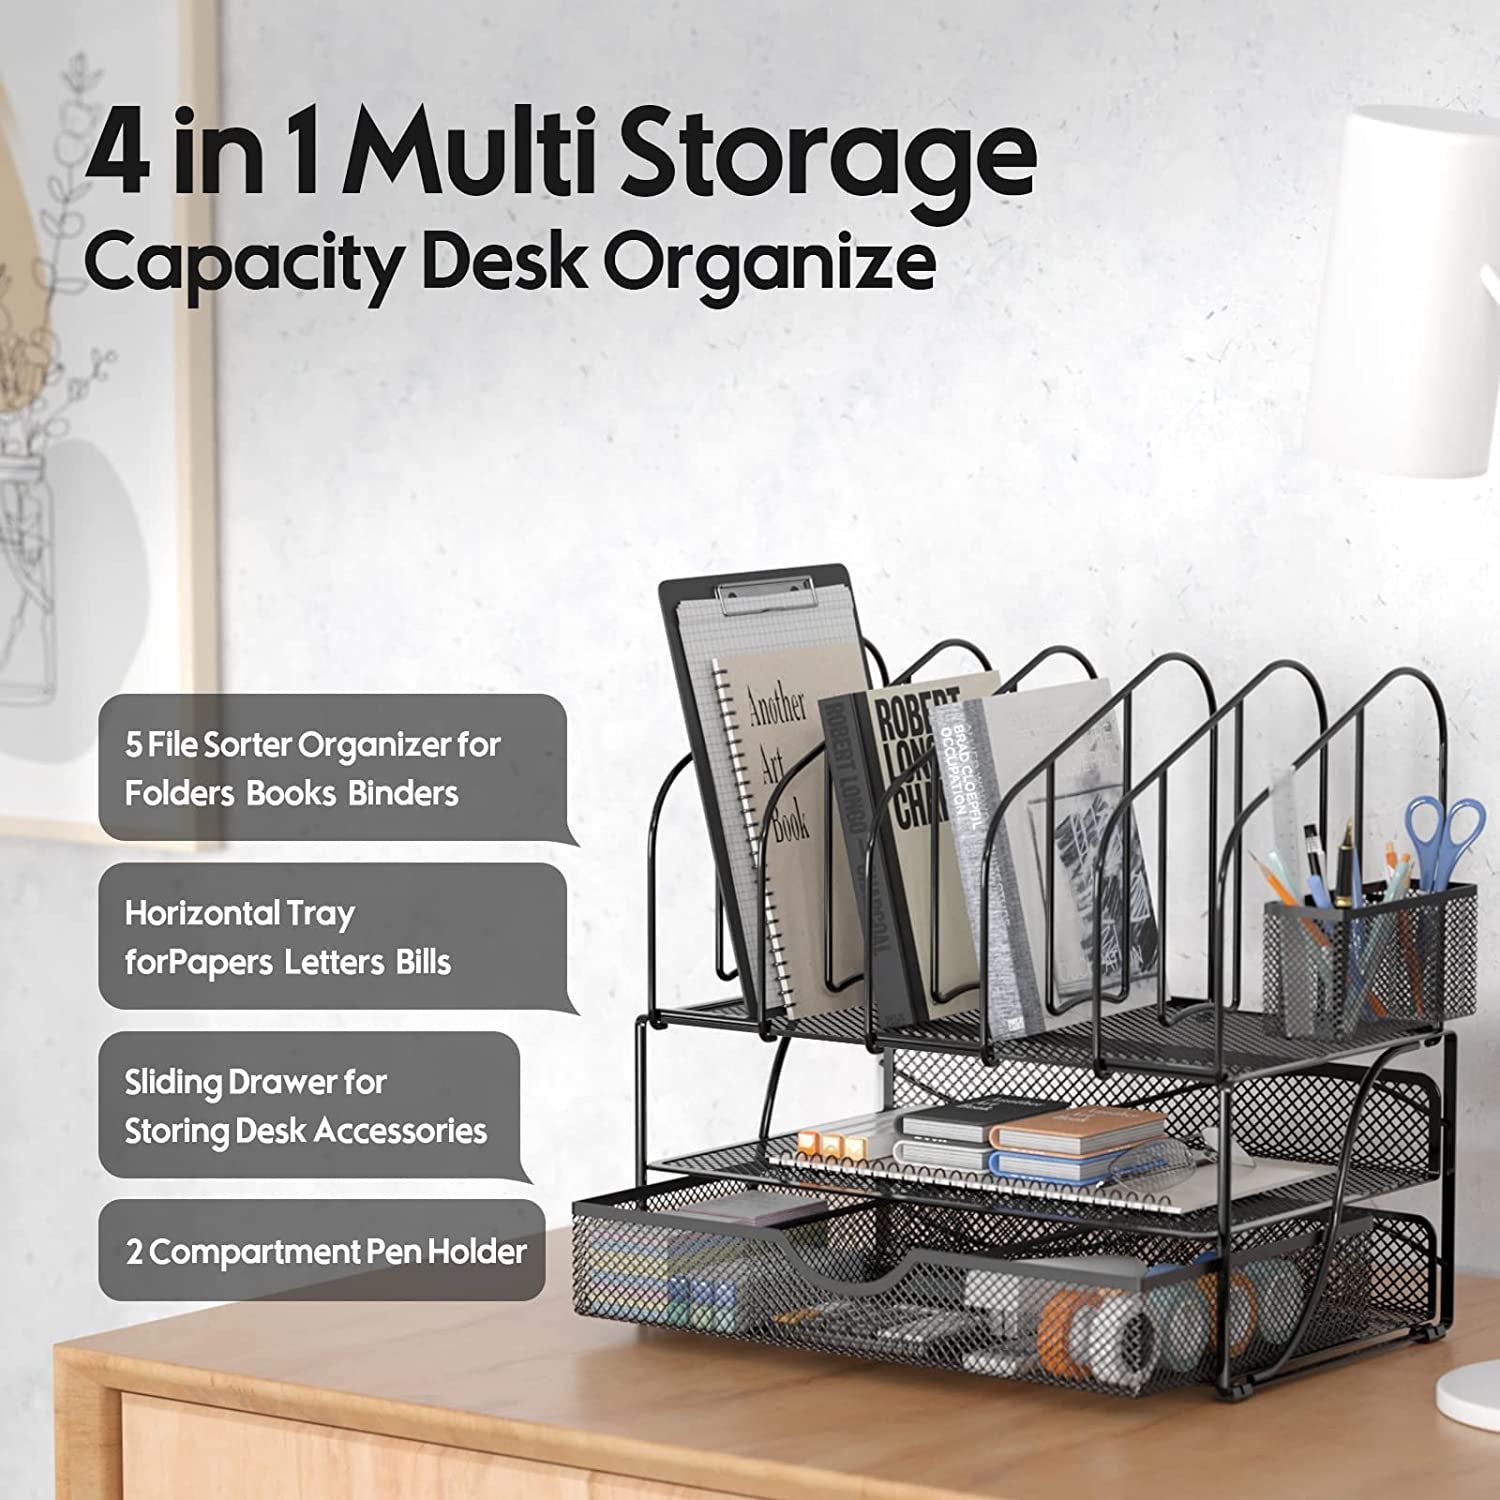 Desk Organizers and Accessories Storage, Desktop Organizer with Drawer & Double Tray & 5 File Sorters & Pen Holder, Mesh Desk Accessories & Workspace Organizers for Office Supplies(Black)